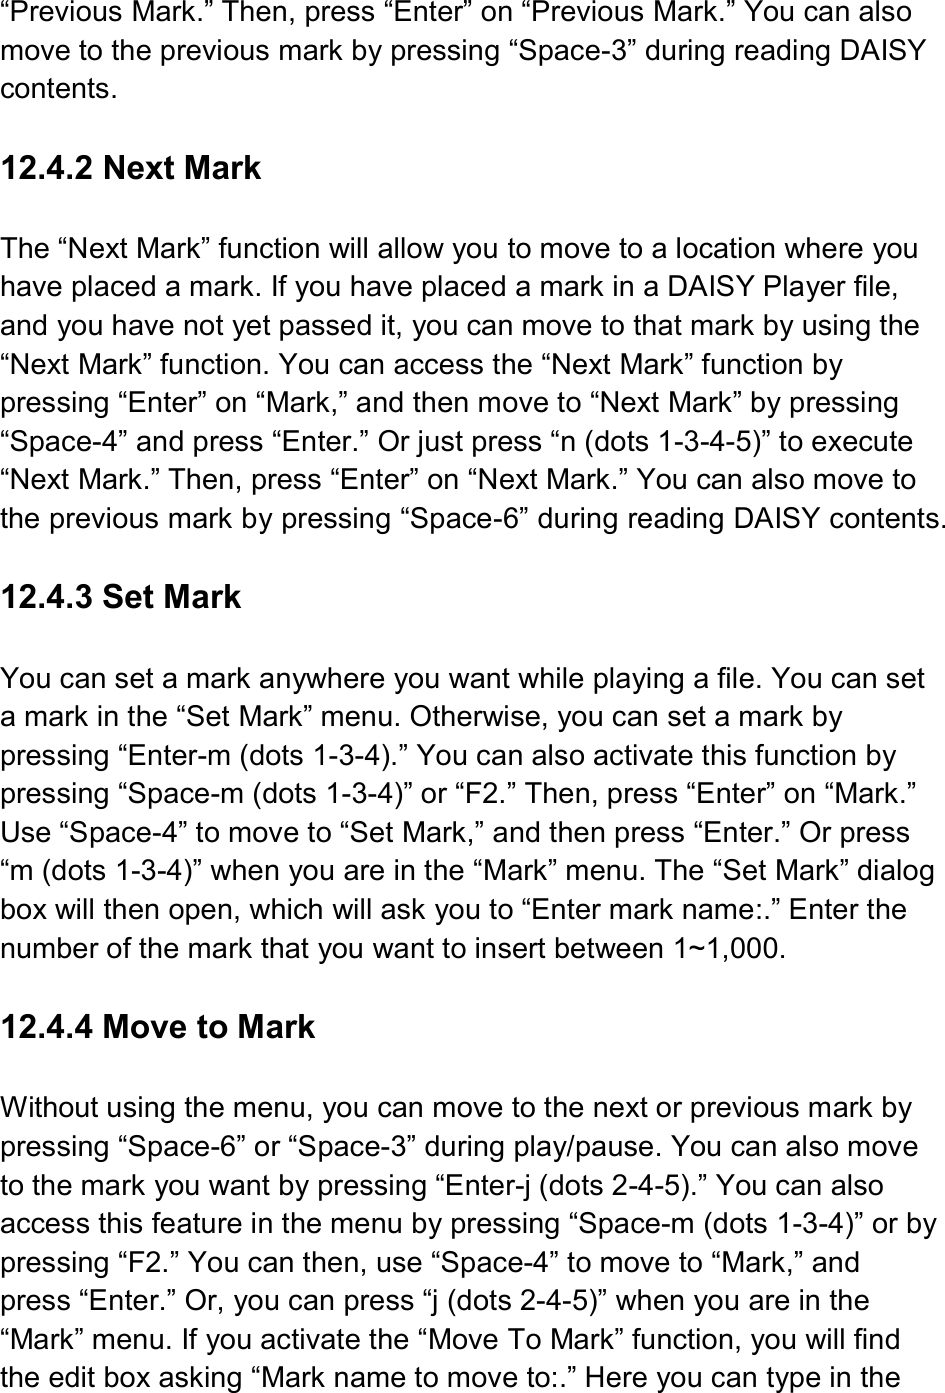  “Previous Mark.” Then, press “Enter” on “Previous Mark.” You can also move to the previous mark by pressing “Space-3” during reading DAISY contents.  12.4.2 Next Mark  The “Next Mark” function will allow you to move to a location where you have placed a mark. If you have placed a mark in a DAISY Player file, and you have not yet passed it, you can move to that mark by using the “Next Mark” function. You can access the “Next Mark” function by pressing “Enter” on “Mark,” and then move to “Next Mark” by pressing “Space-4” and press “Enter.” Or just press “n (dots 1-3-4-5)” to execute “Next Mark.” Then, press “Enter” on “Next Mark.” You can also move to the previous mark by pressing “Space-6” during reading DAISY contents.  12.4.3 Set Mark  You can set a mark anywhere you want while playing a file. You can set a mark in the “Set Mark” menu. Otherwise, you can set a mark by pressing “Enter-m (dots 1-3-4).” You can also activate this function by pressing “Space-m (dots 1-3-4)” or “F2.” Then, press “Enter” on “Mark.” Use “Space-4” to move to “Set Mark,” and then press “Enter.” Or press “m (dots 1-3-4)” when you are in the “Mark” menu. The “Set Mark” dialog box will then open, which will ask you to “Enter mark name:.” Enter the number of the mark that you want to insert between 1~1,000.  12.4.4 Move to Mark  Without using the menu, you can move to the next or previous mark by pressing “Space-6” or “Space-3” during play/pause. You can also move to the mark you want by pressing “Enter-j (dots 2-4-5).” You can also access this feature in the menu by pressing “Space-m (dots 1-3-4)” or by pressing “F2.” You can then, use “Space-4” to move to “Mark,” and press “Enter.” Or, you can press “j (dots 2-4-5)” when you are in the “Mark” menu. If you activate the “Move To Mark” function, you will find the edit box asking “Mark name to move to:.” Here you can type in the 